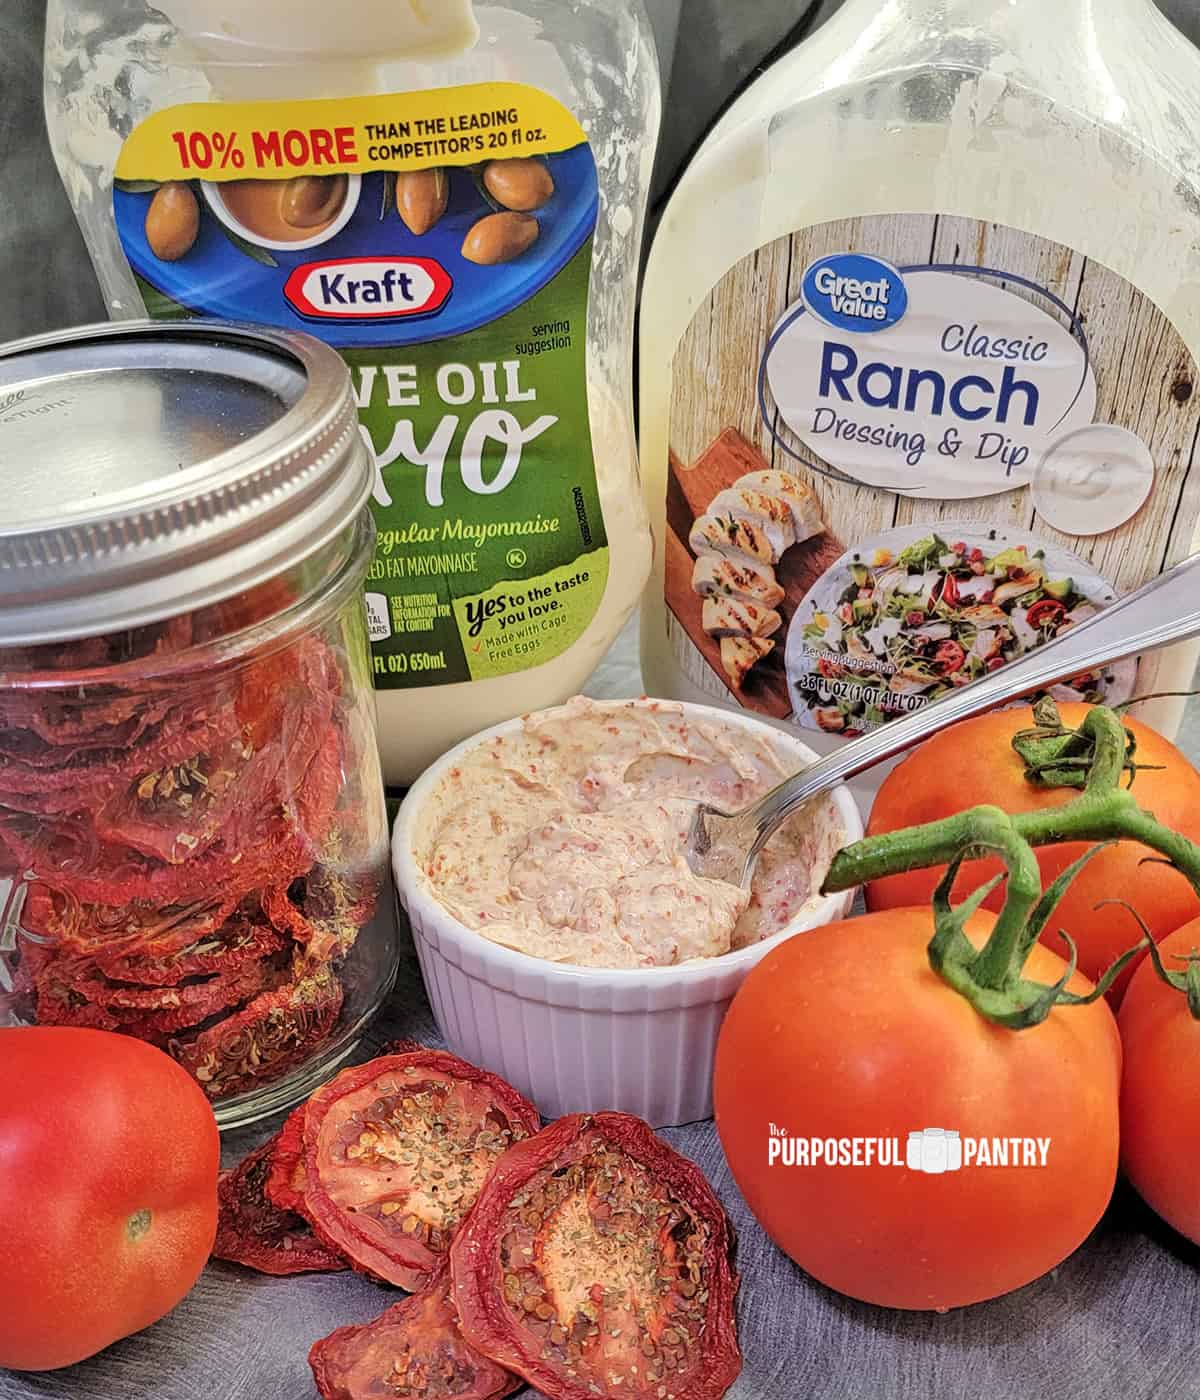 Ingredients for Tomato sandwich spread: Mayo bottle, ranch dressing bottle, jar of dried tomatoes, fresh tomatoes